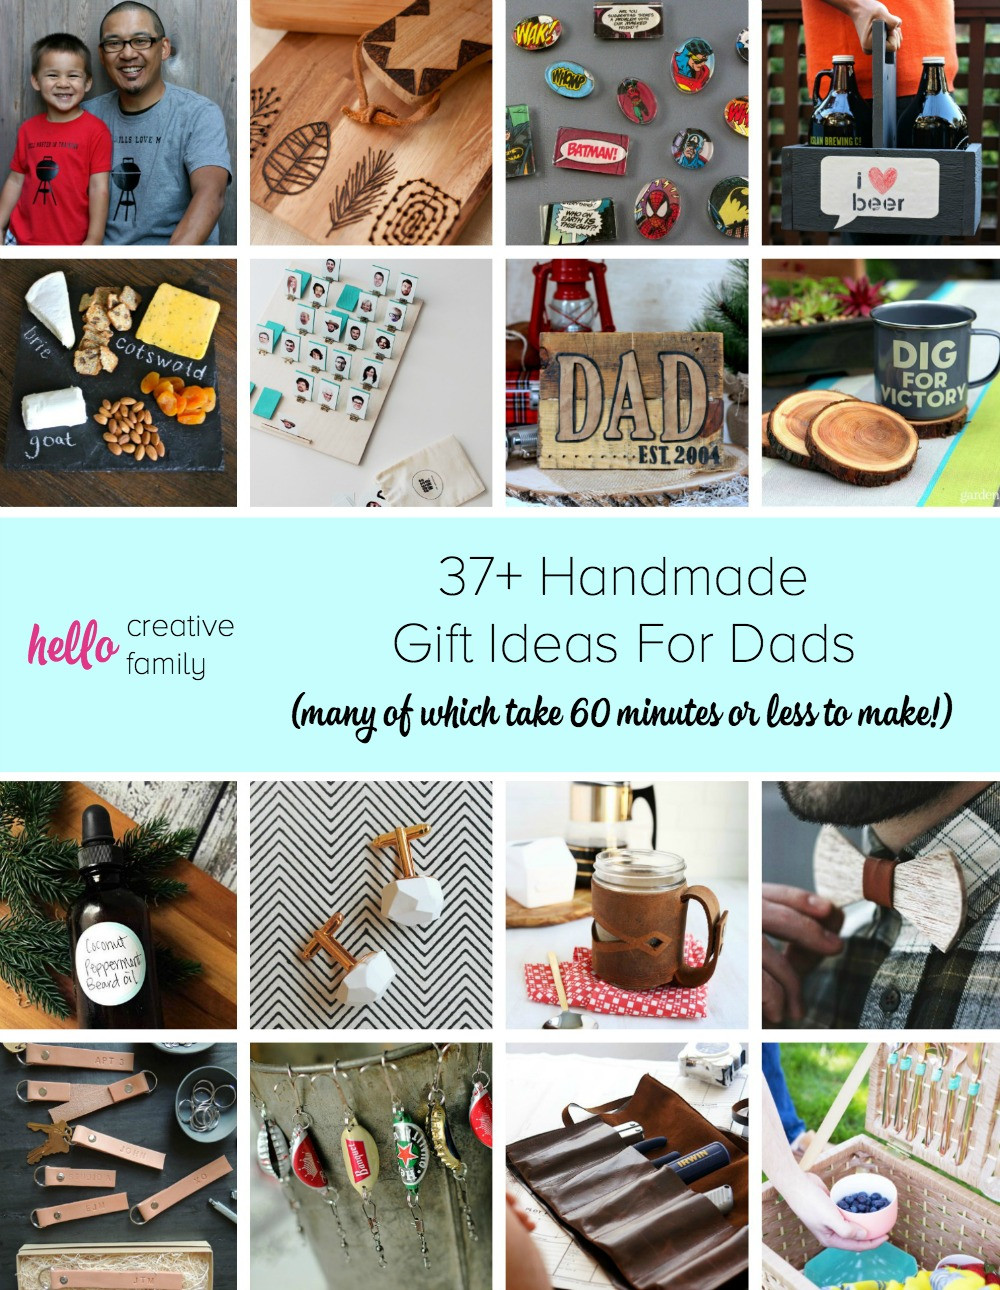 Homemade Birthday Gifts For Dad
 37 Handmade Gift Ideas For Dads many of which take 60